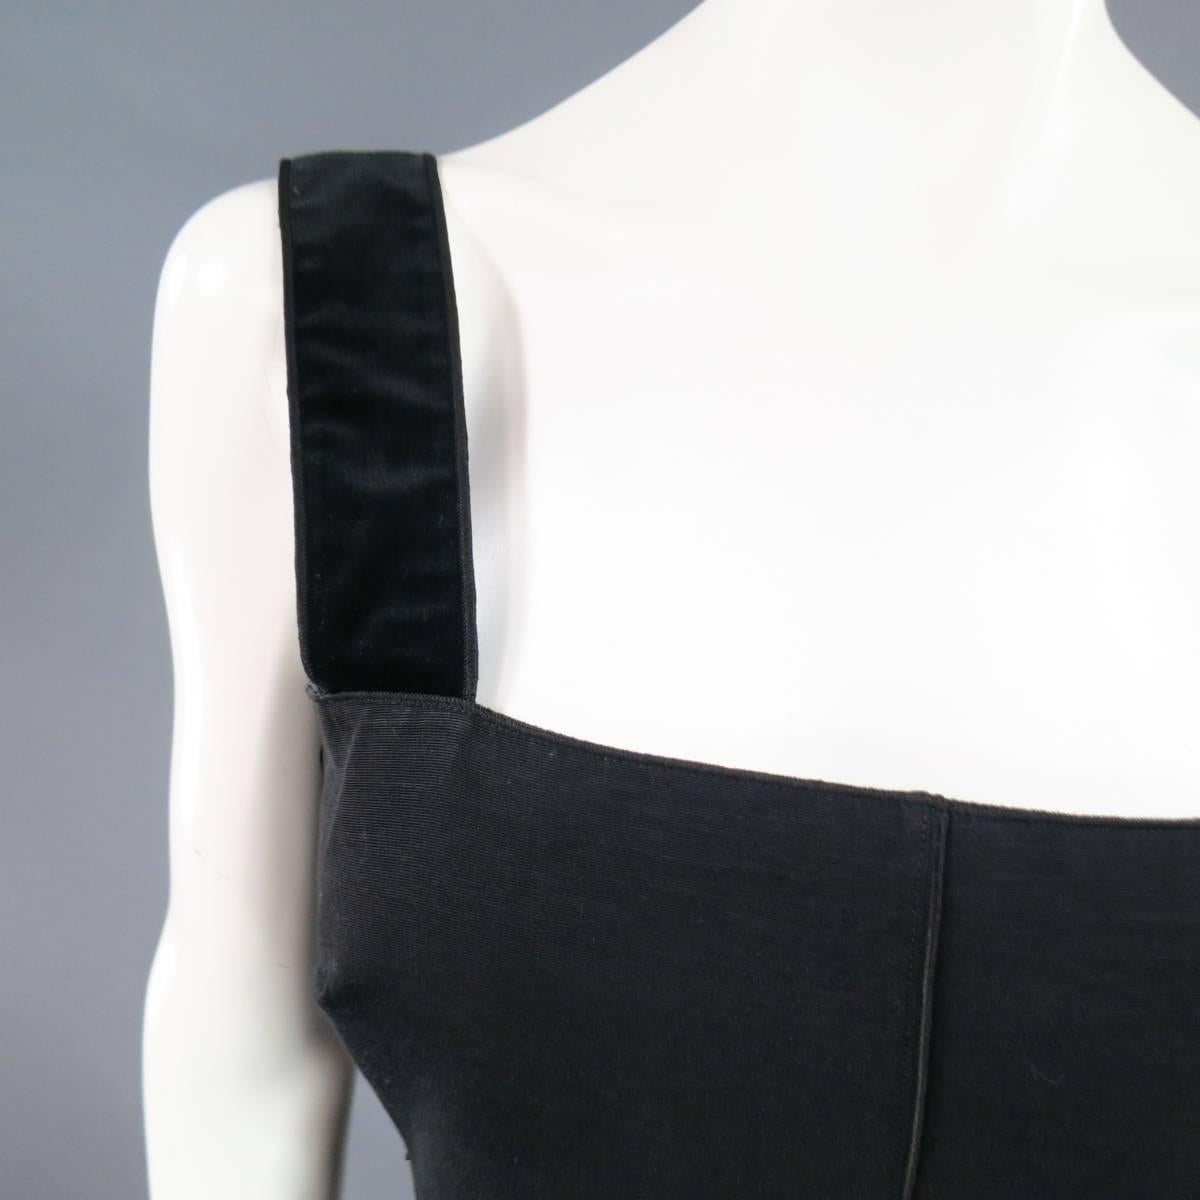 This lovely D&G by DOLCE & GABBANA top comes in black coated faille with embroidered trim, thick velvet straps, ribbon waist band, and box pleated peplum. Wear throughout fabric.
 
Fair Pre-Owned Condition.
Marked: 36
 
Measurements:
 
Bust: